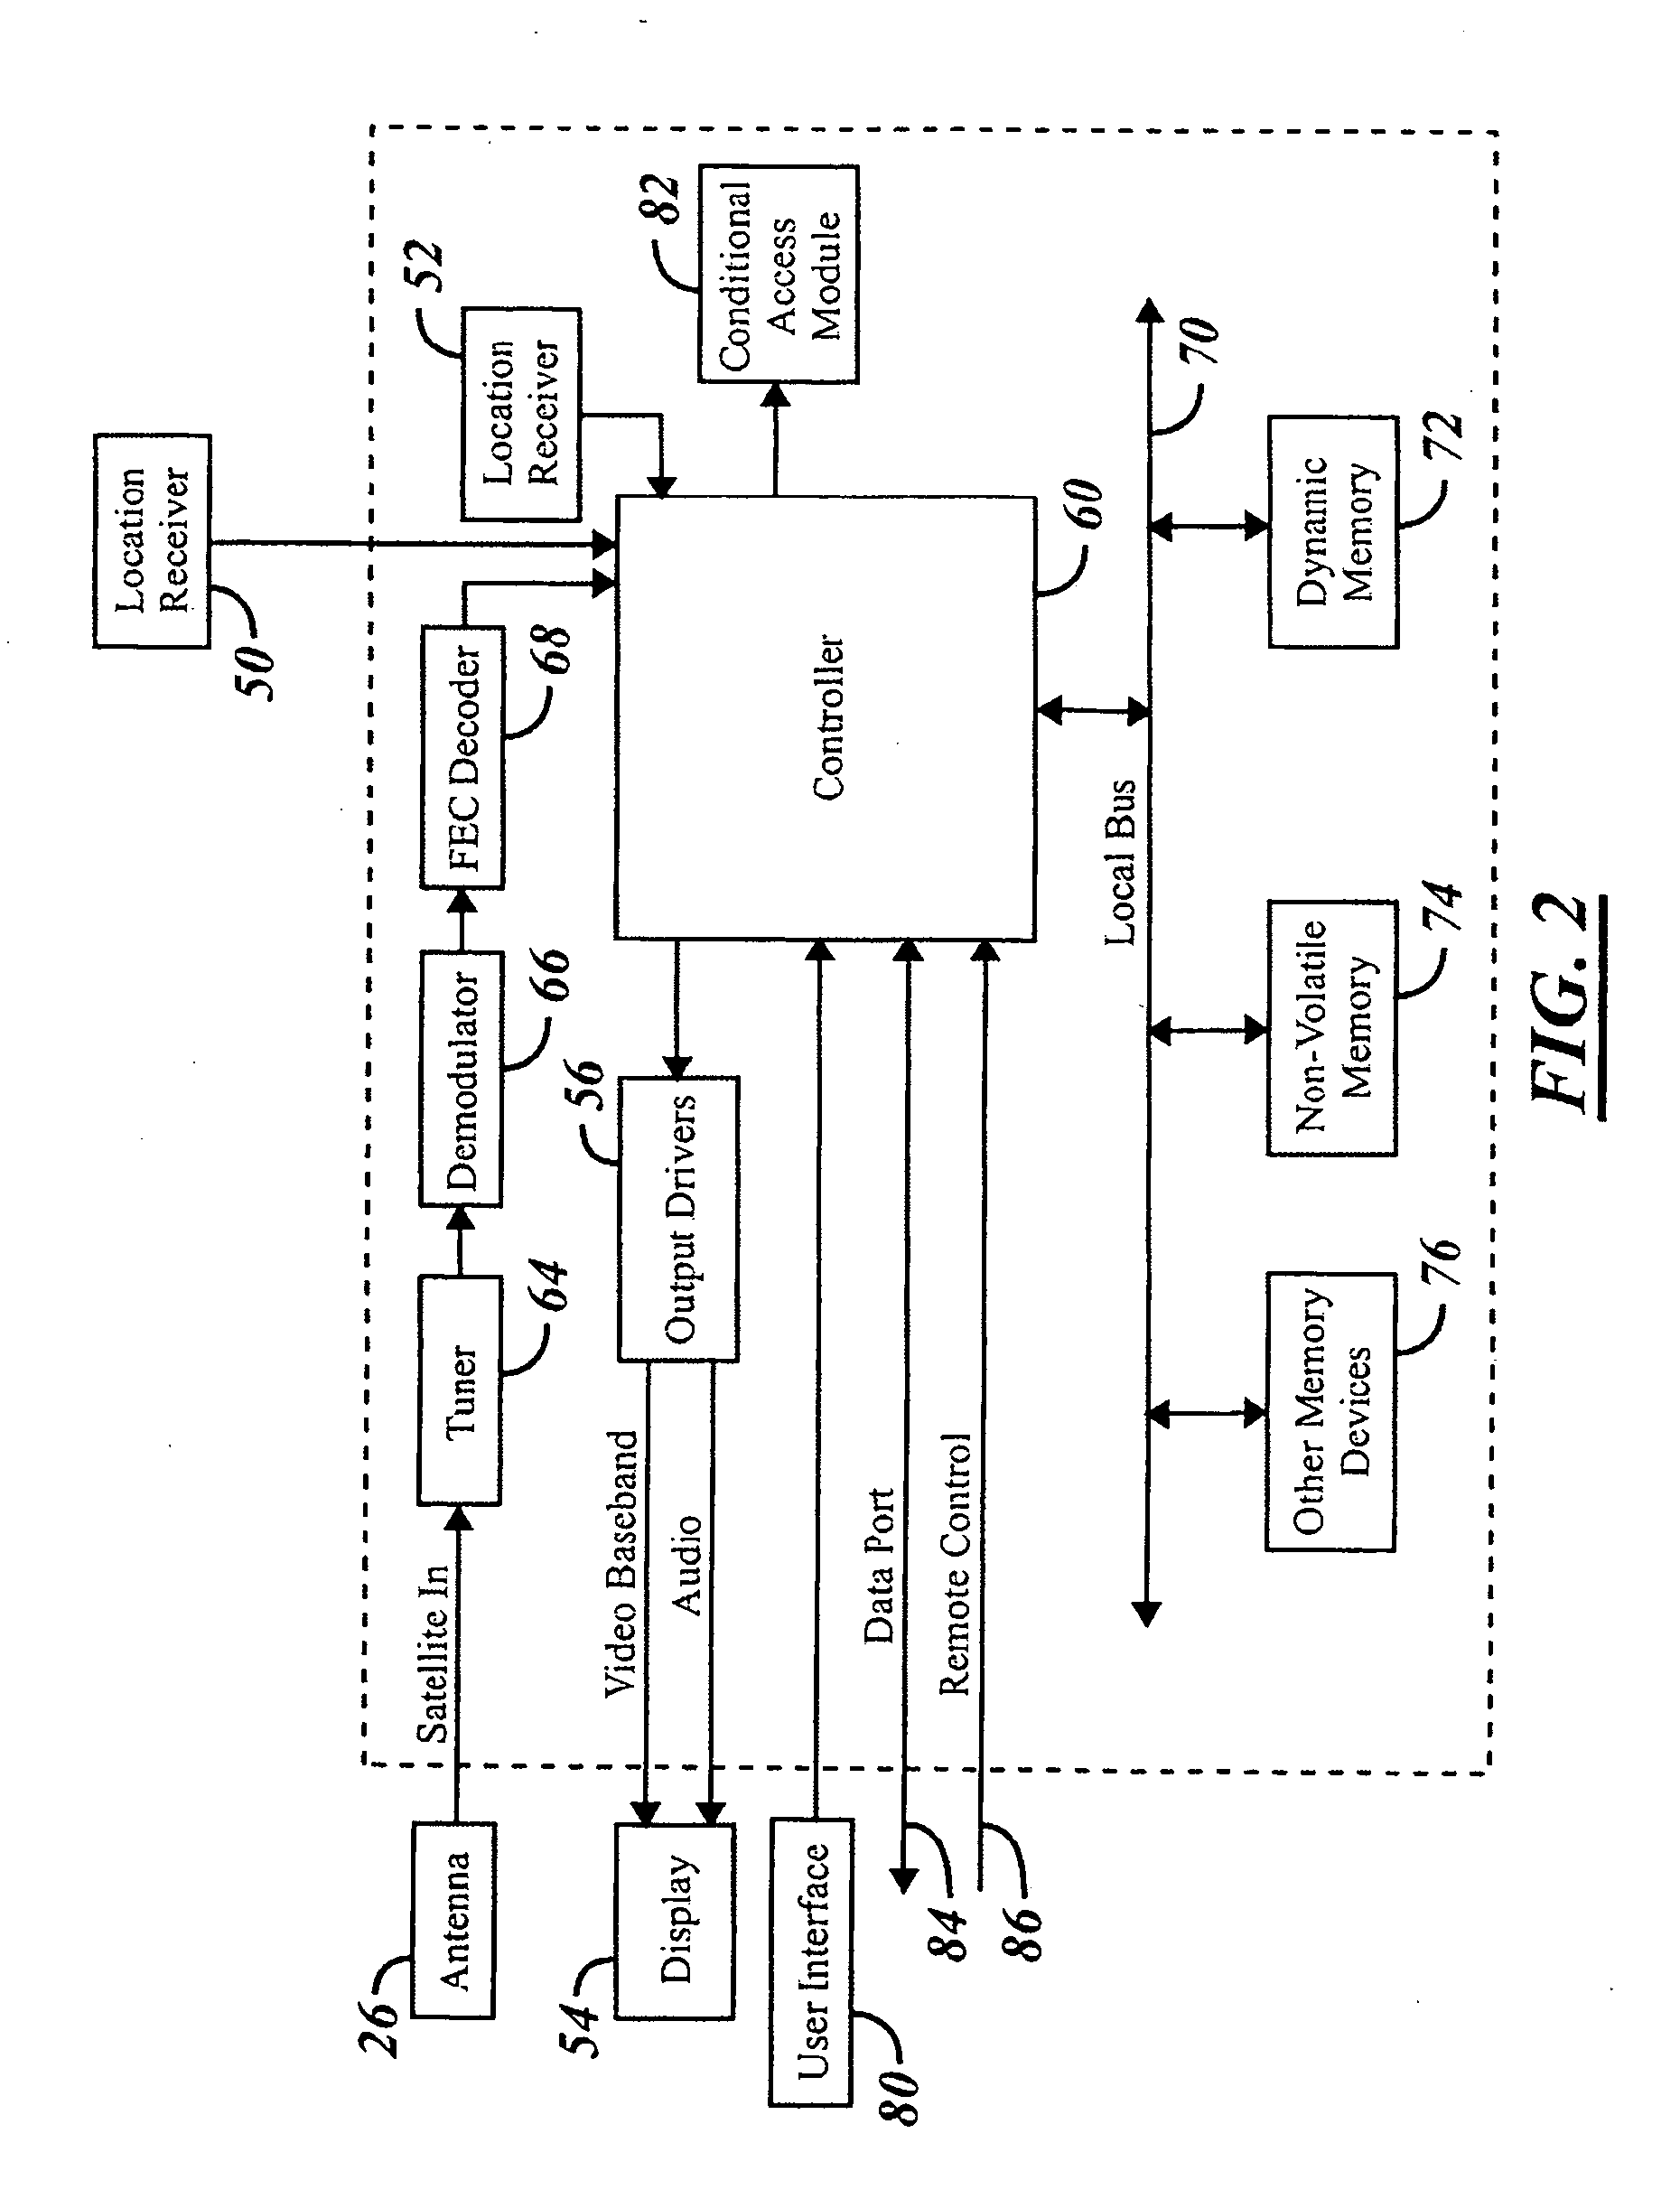 Receiving apparatus using non-volatile memory and method of operating the same